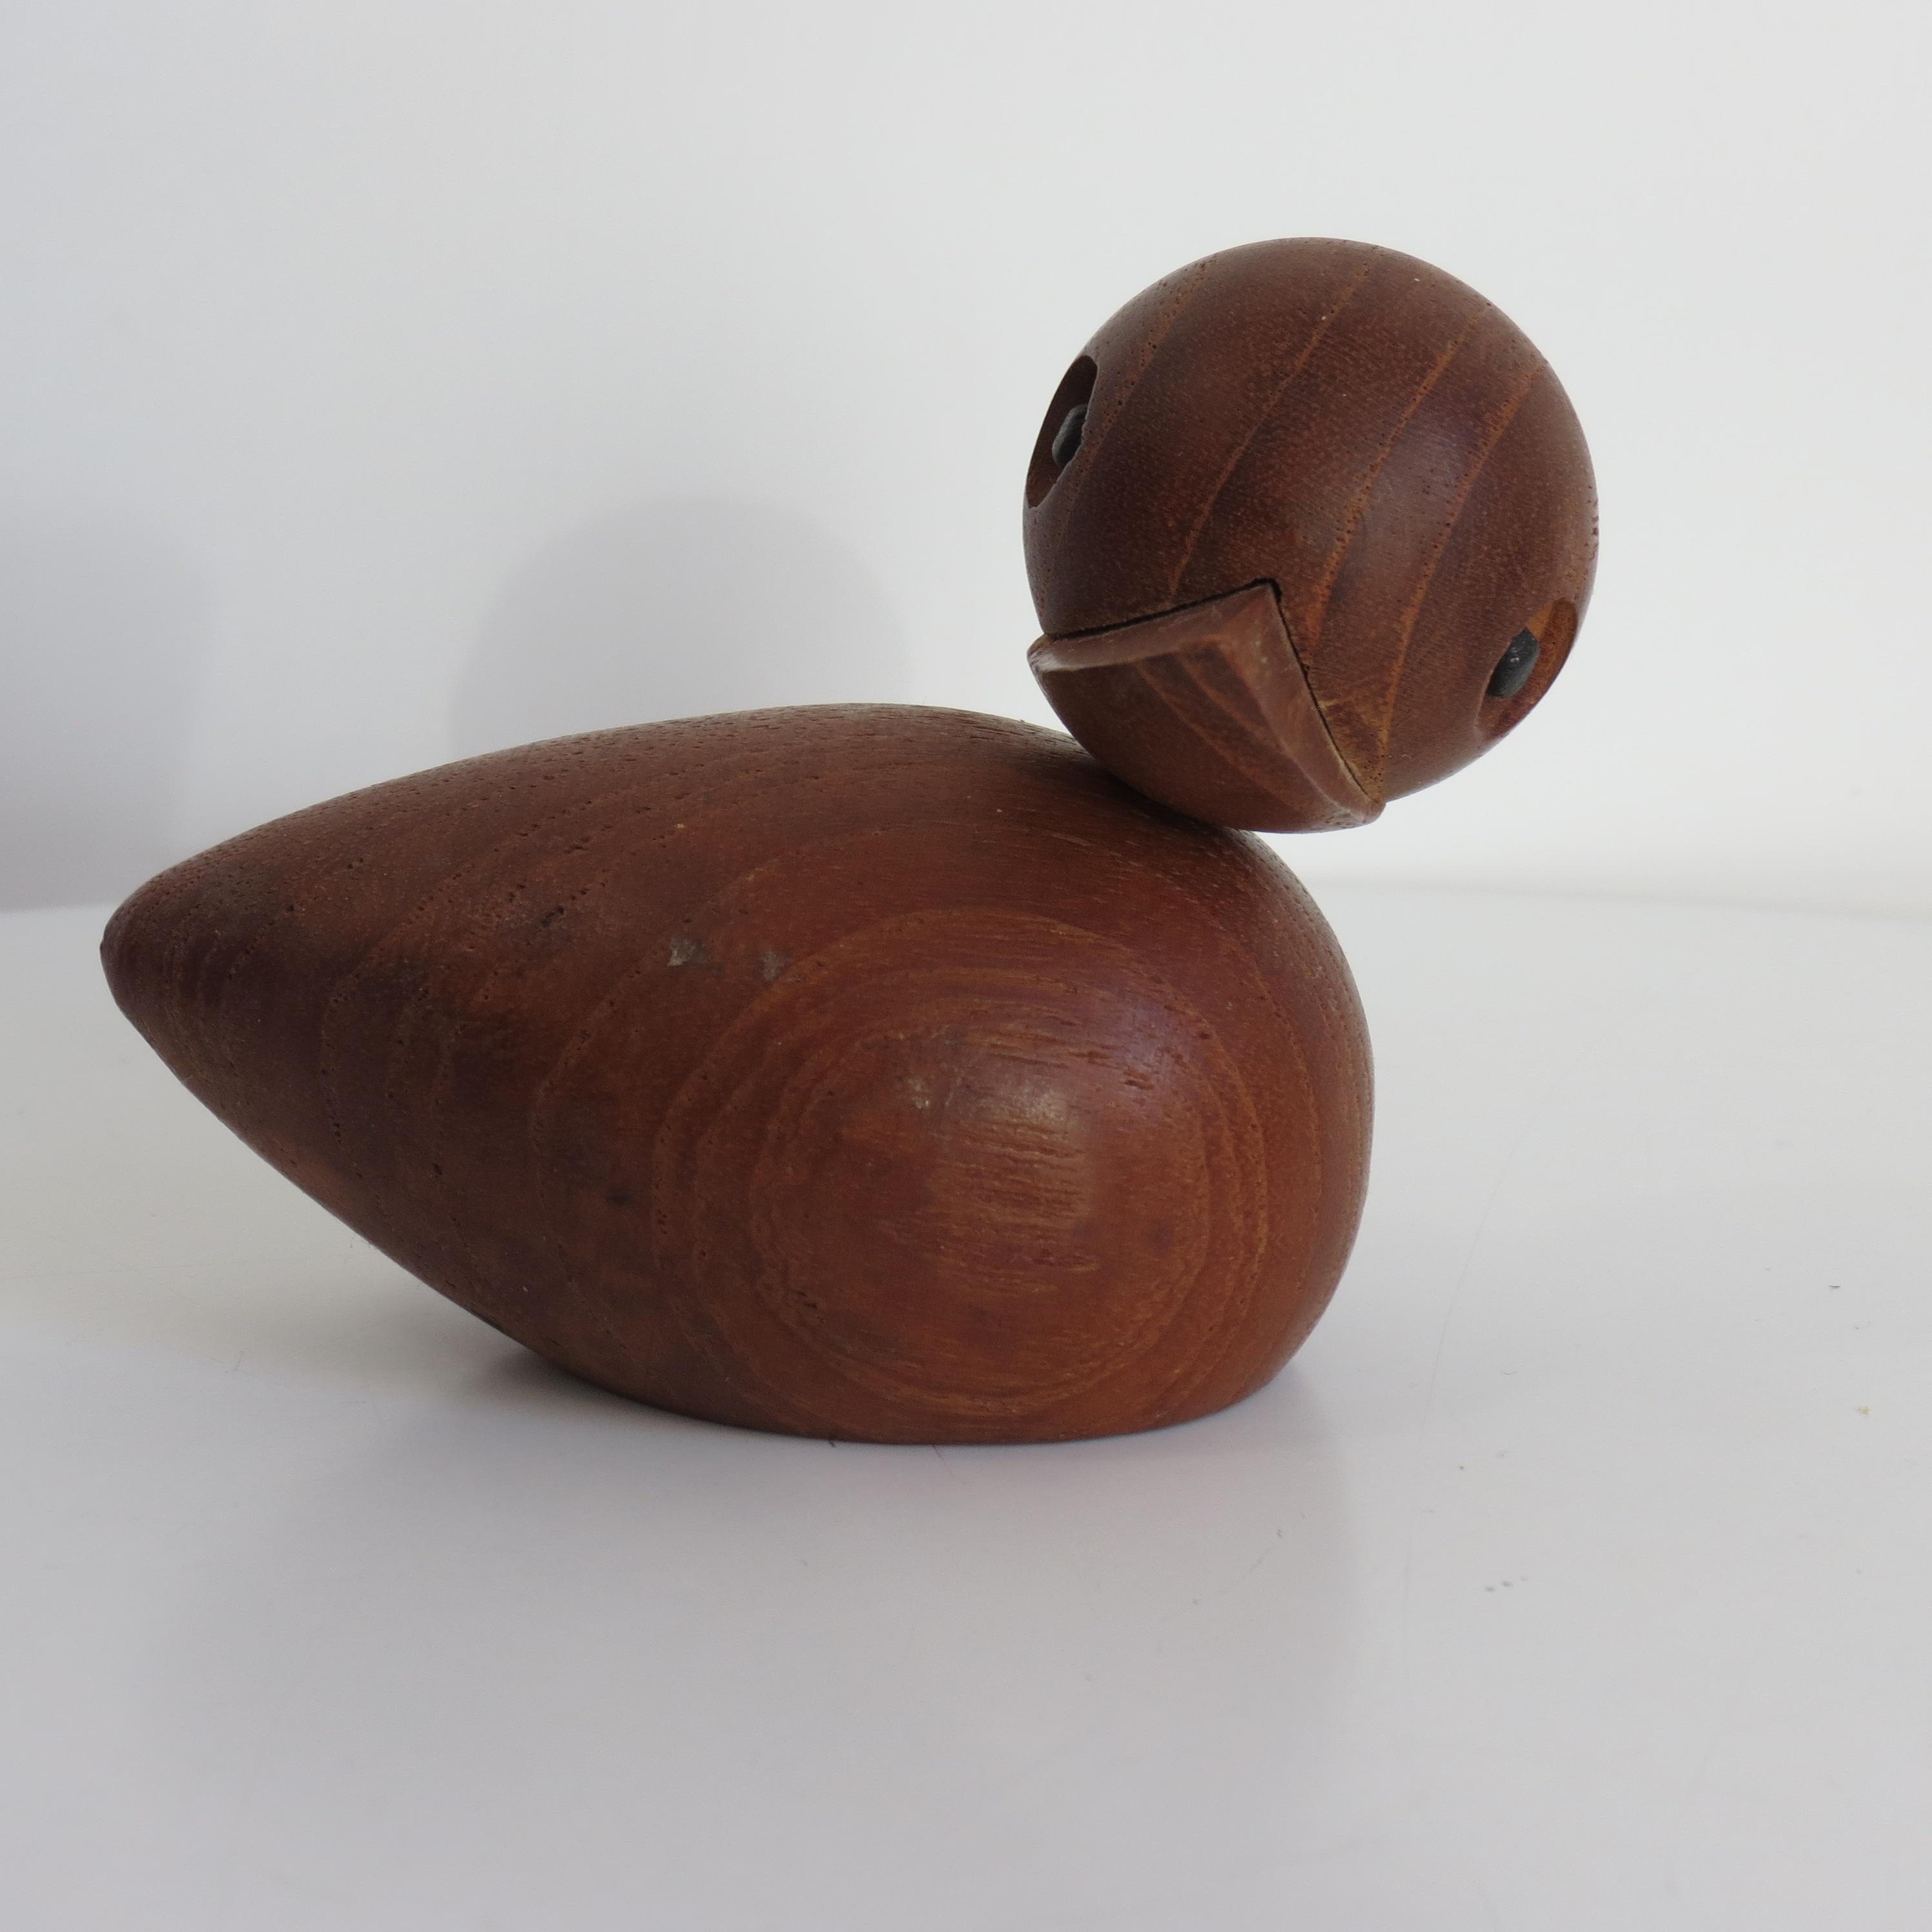 English Vintage Teak Wooden Toy Duck by Empire 1960s Hans Bollinger Style